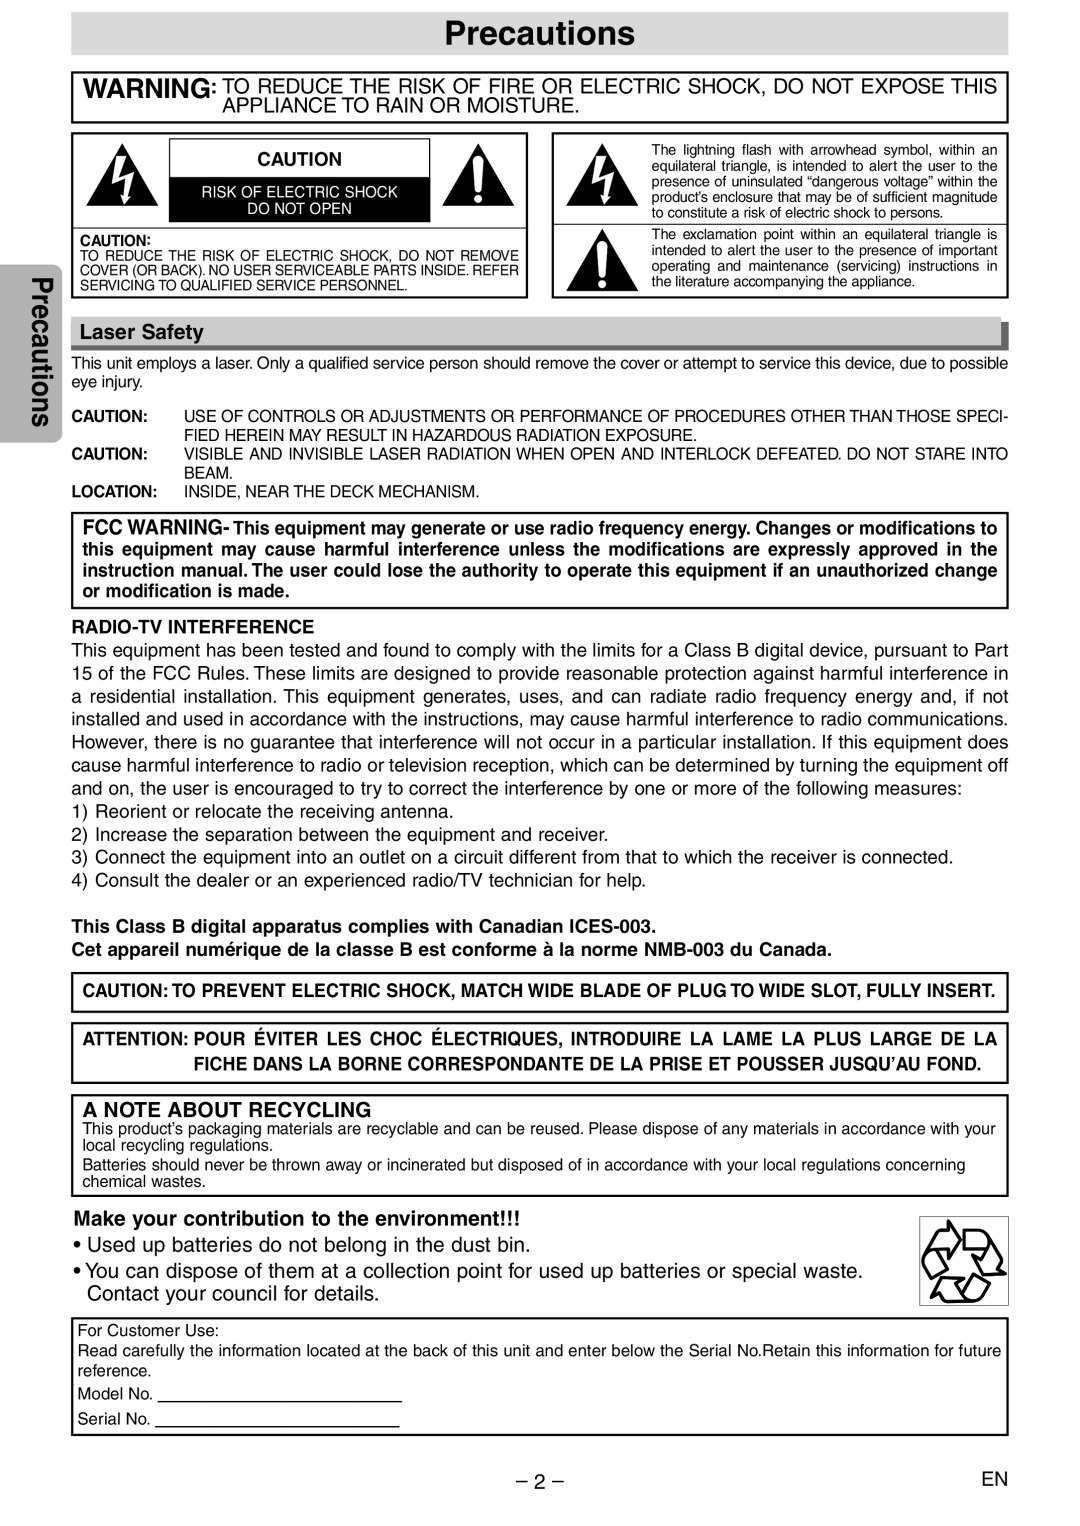 Magnavox MSD804 owner manual Precautions, Laser Safety, Make your contribution to the environment 